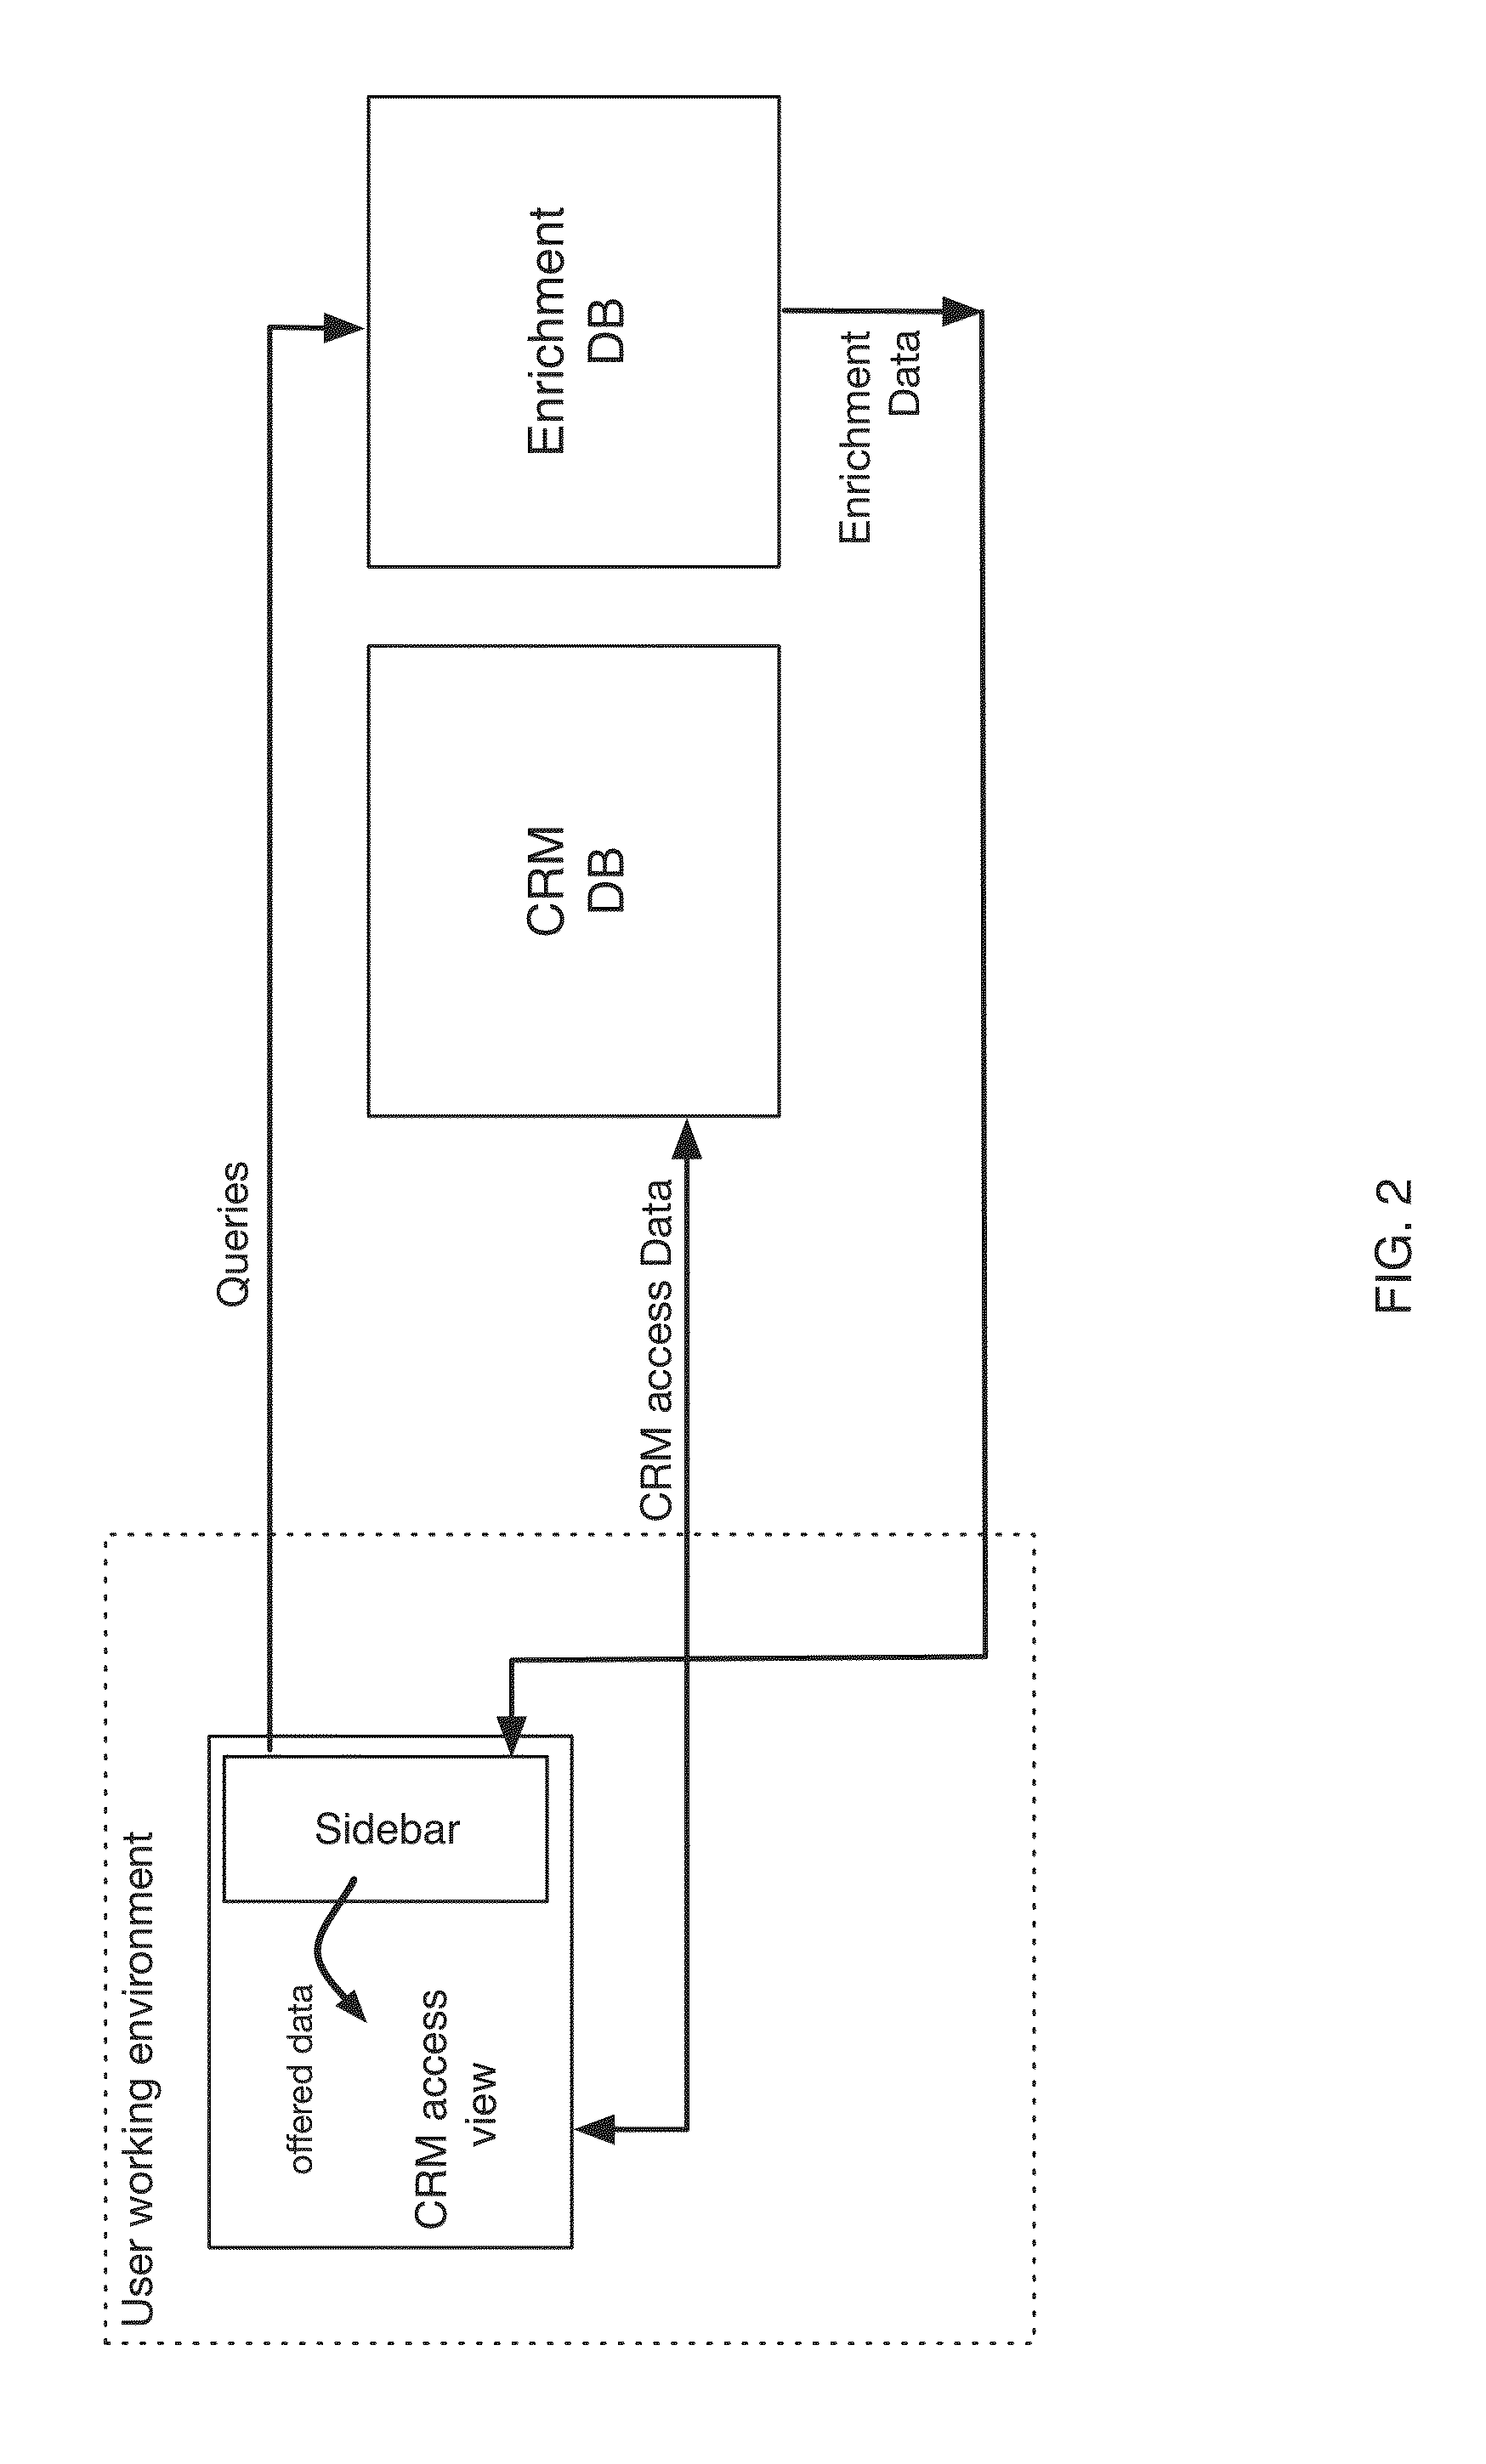 Method of enhancing customer relationship management content and workflow